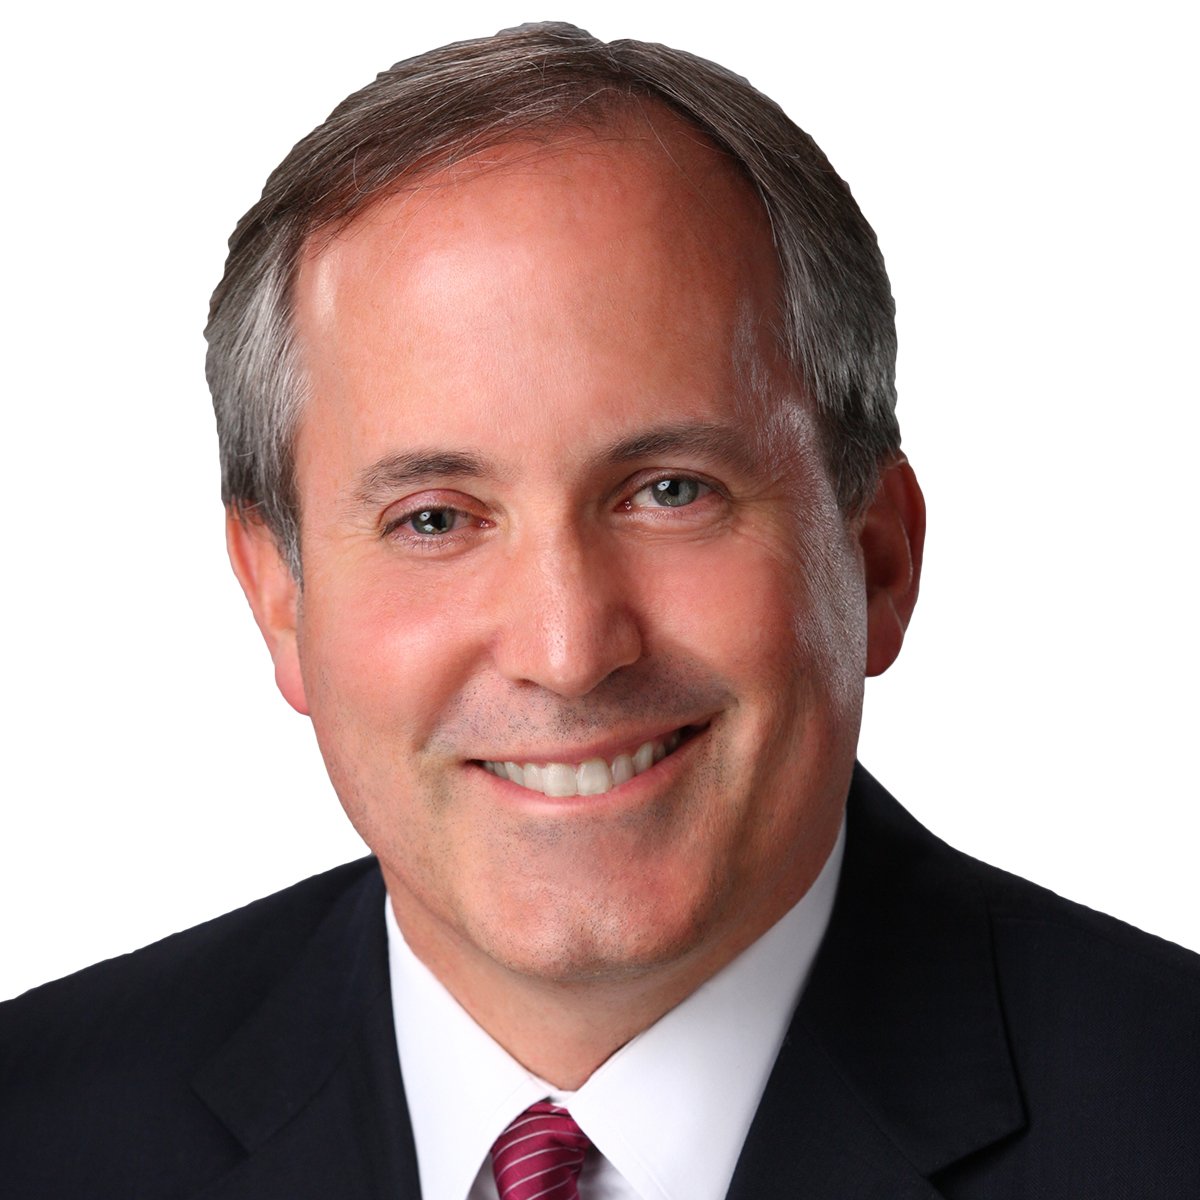 BREAKING - YOUR REACTION: Donald Trump Confirms He Is Considering Ken Paxton (@KenPaxtonTX) for U.S. Attorney General in Next Administration